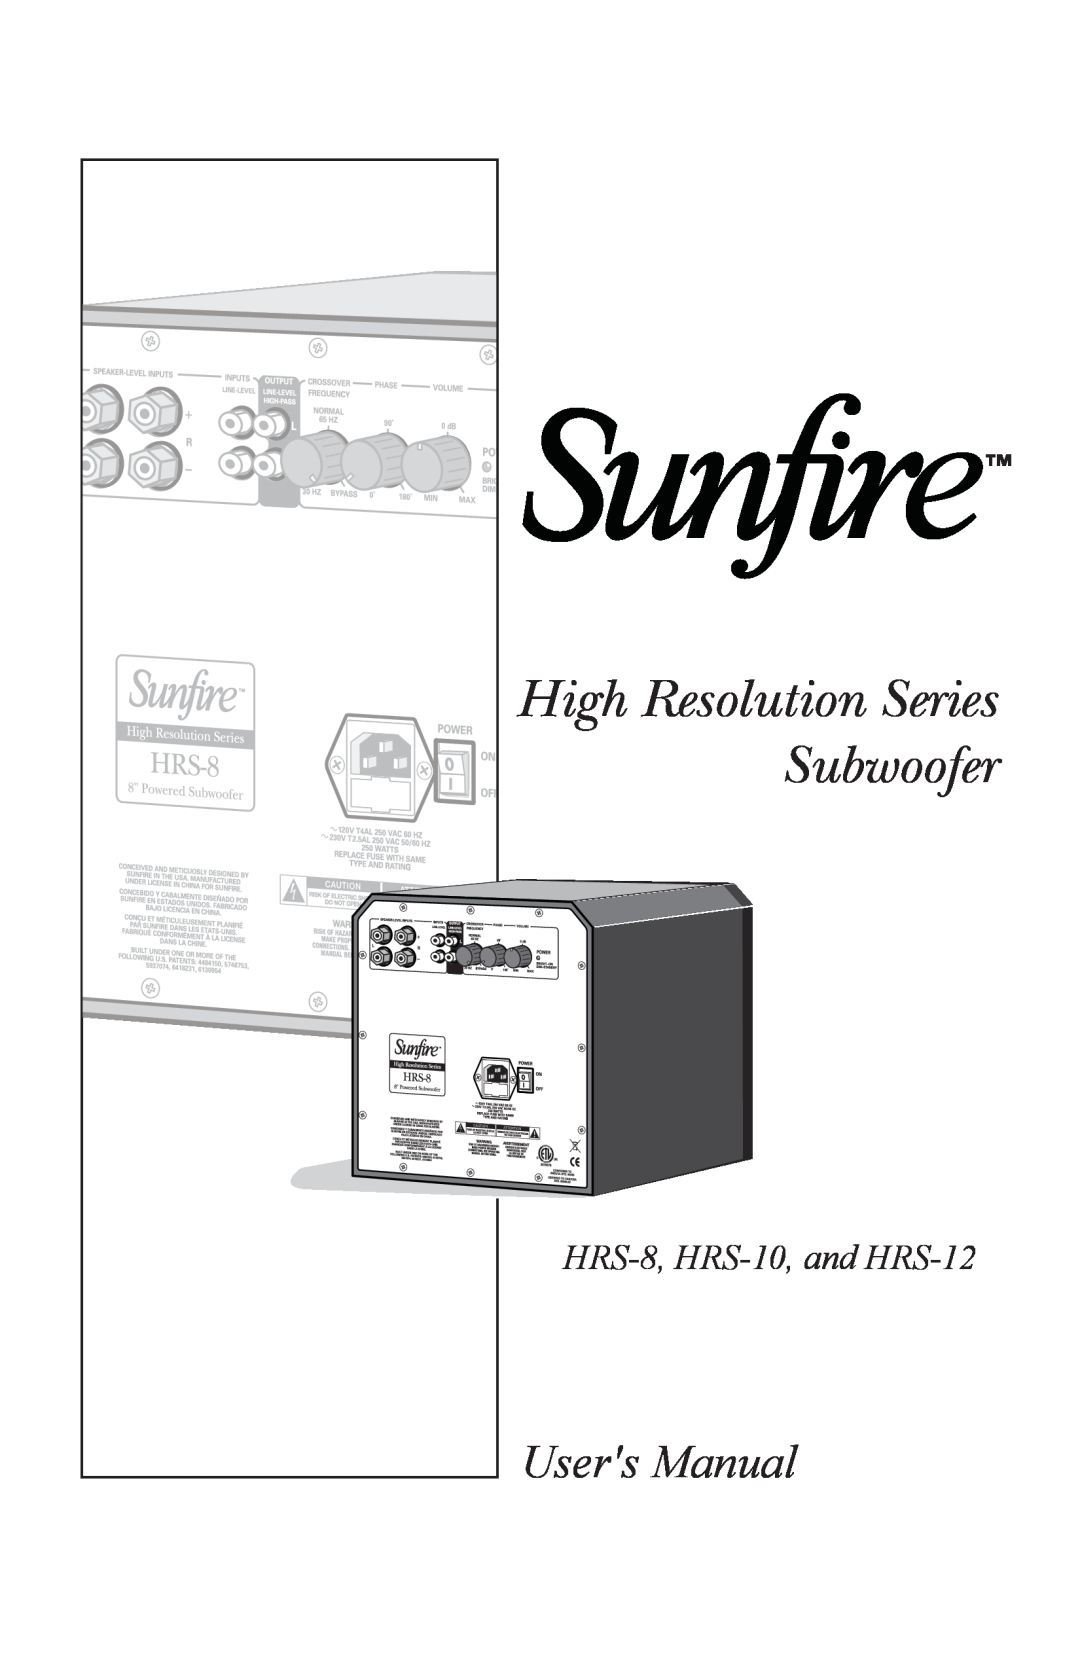 Sunfire user manual Subwoofer, High Resolution Series, HRS-8, HRS-10, and HRS-12 